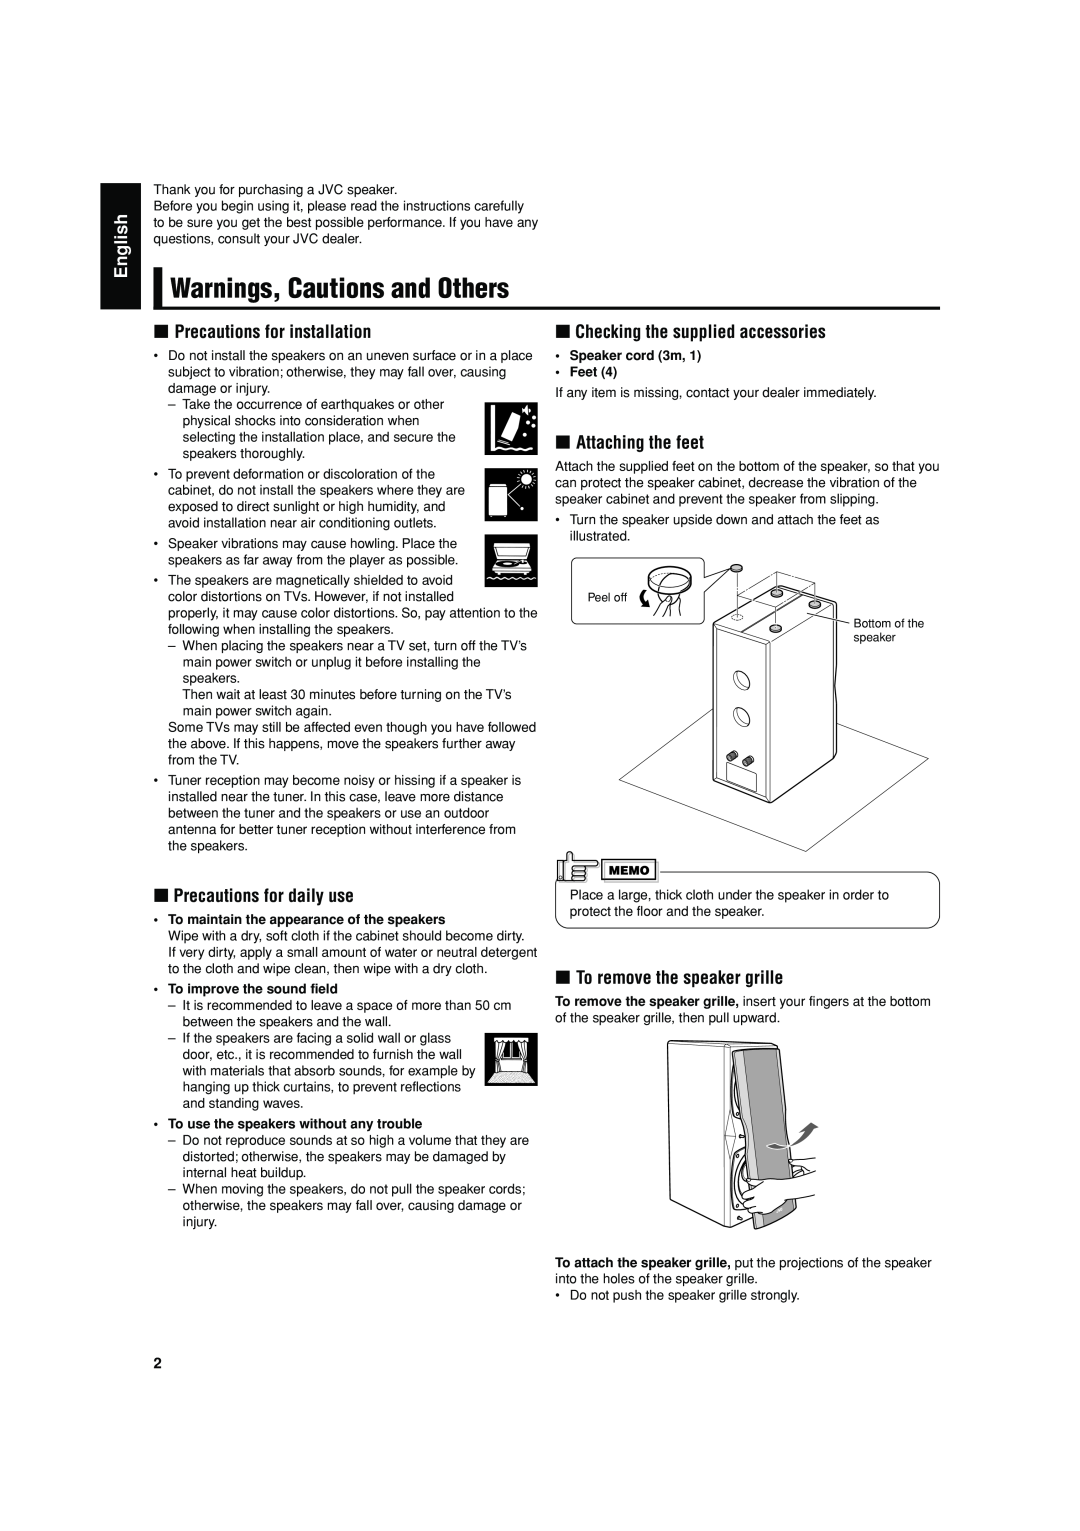 JVC SX-LC33 Warnings, Cautions and Others, 7Precautions for installation, 7Precautions for daily use, 7Attaching the feet 